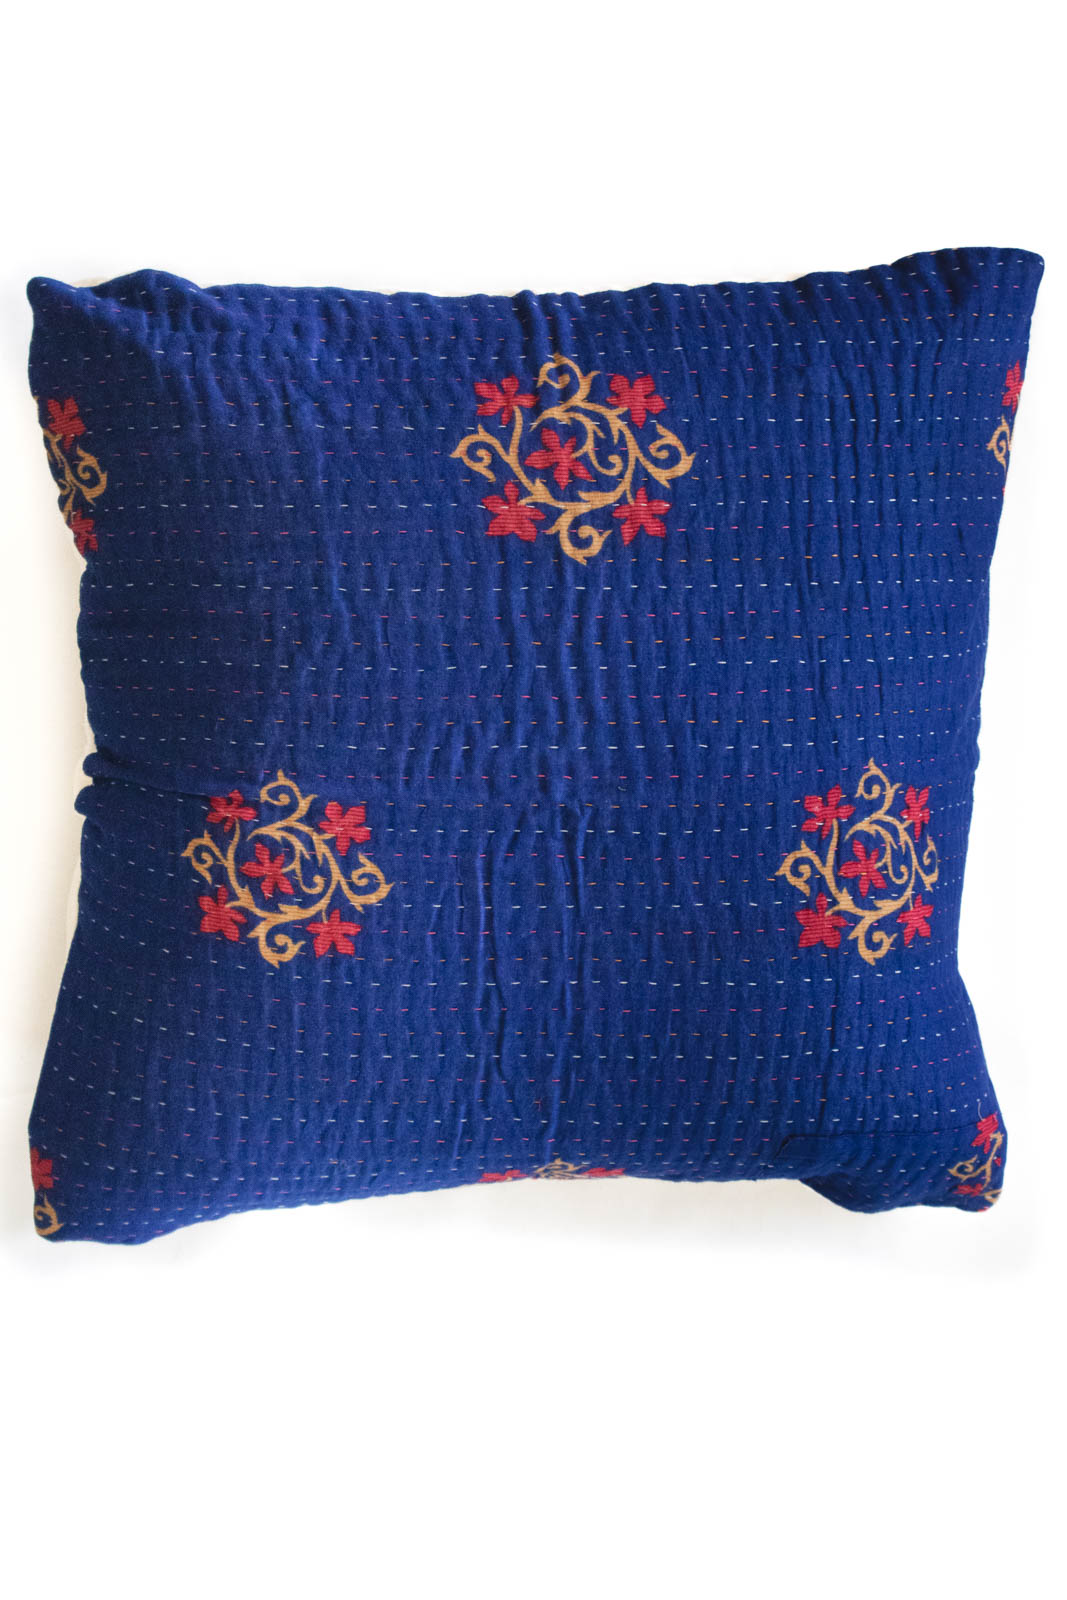 Fearless no. 8 Kantha Pillow Cover